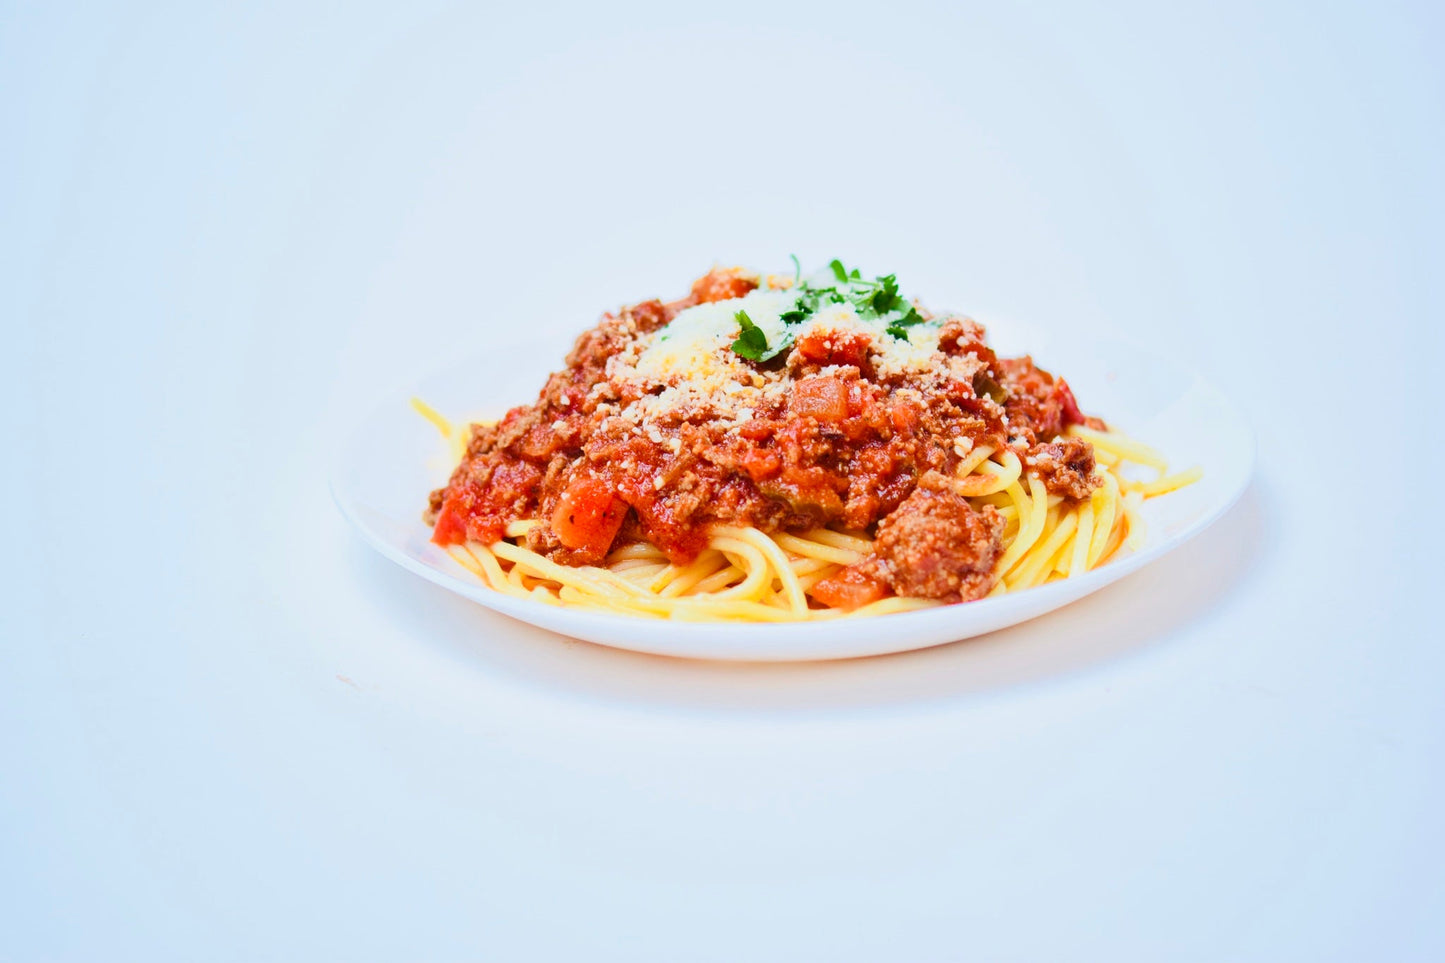 Spaghetti with Meat Sauce - Adult Size